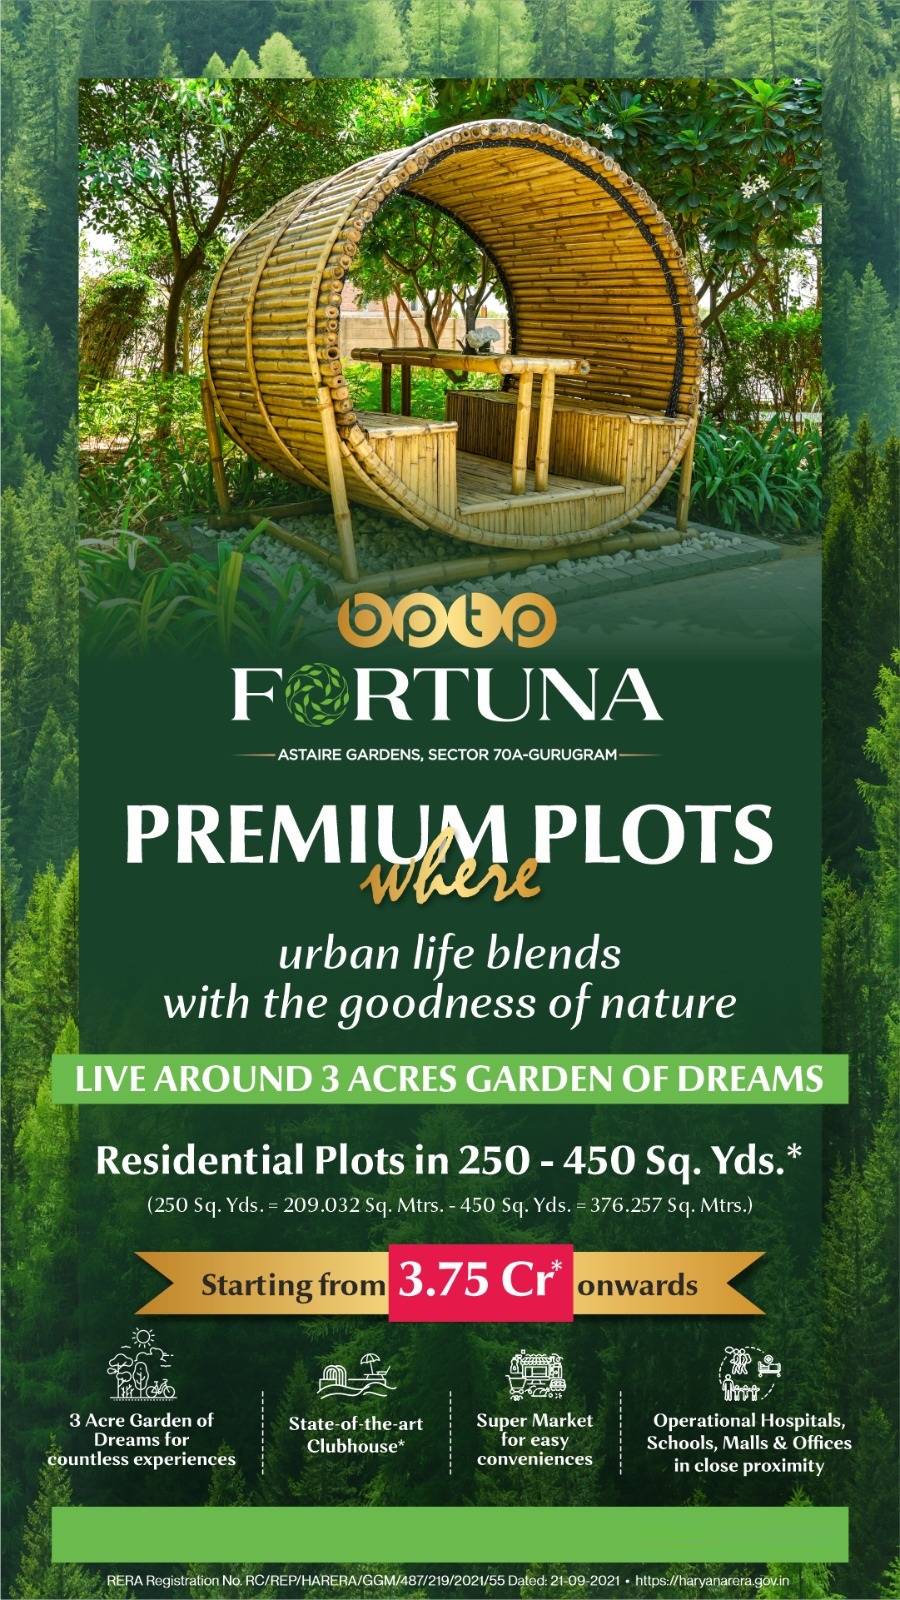 Residential plots price starts Rs 3.75 Cr at BPTP Fortuna in Sector 70A, Gurgaon Update